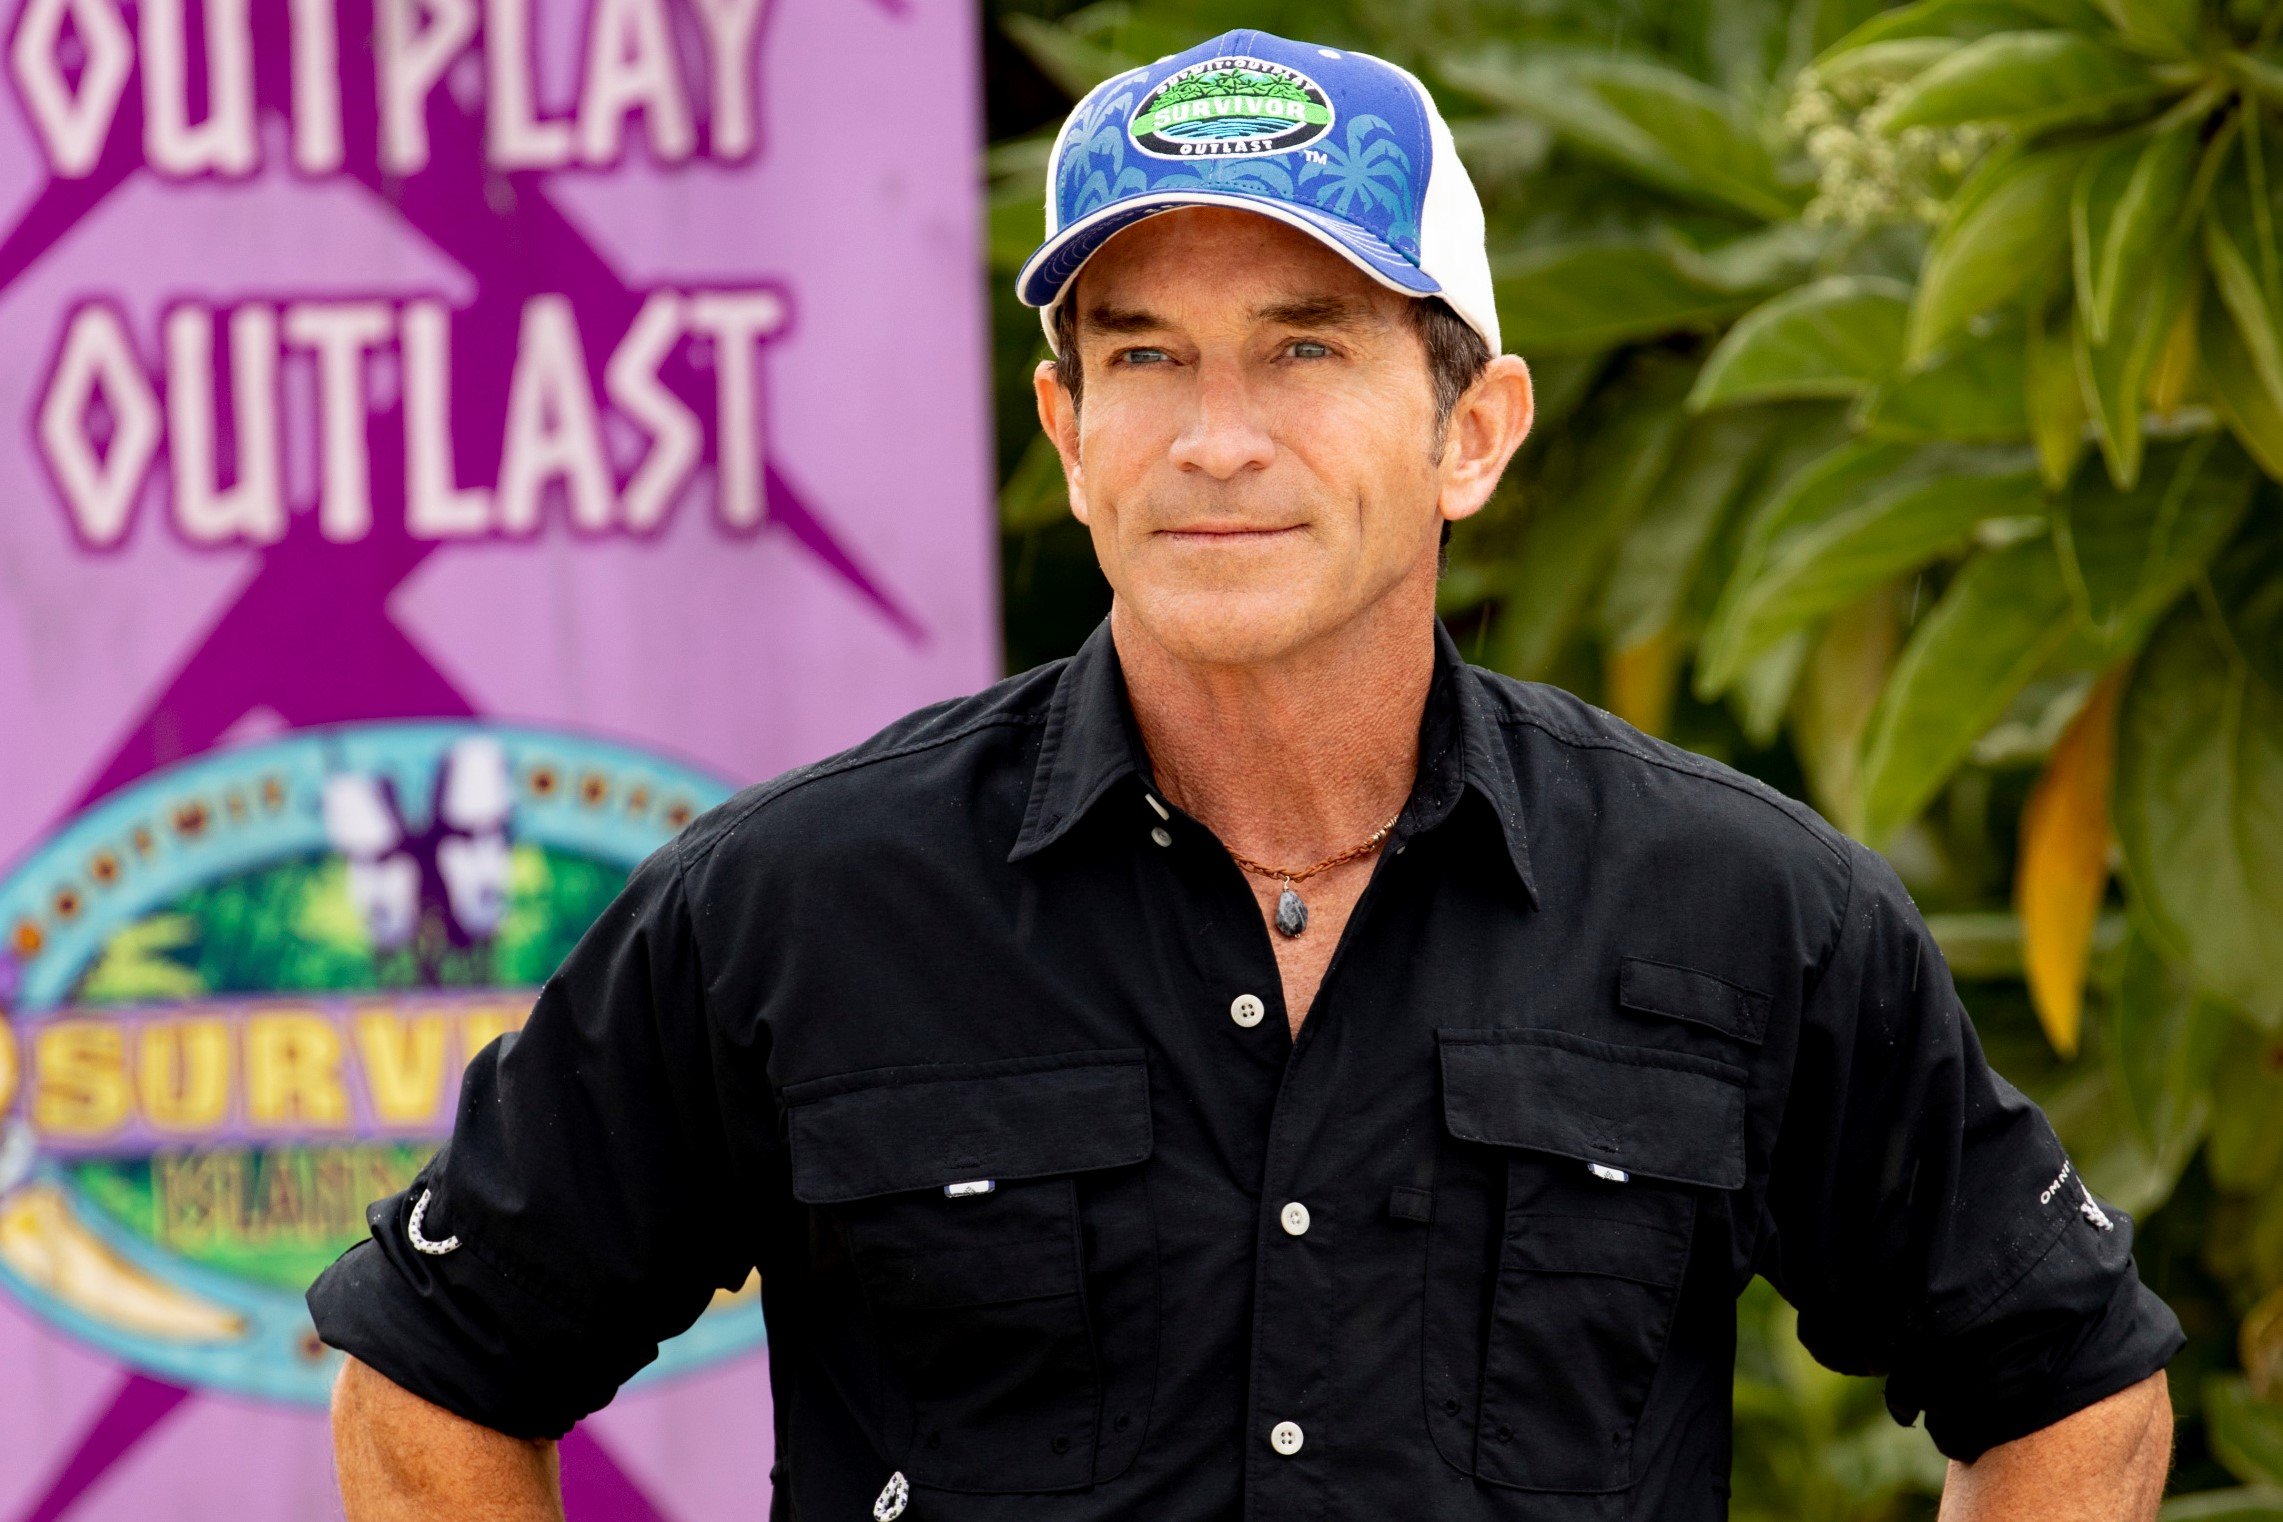 Jeff Probst, seen hosting long-running reality TV show 'Survivor' Season 39, wears a black button-up shirt rolled up at the sleeves and a blue, green, and white 'Survivor' baseball cap.